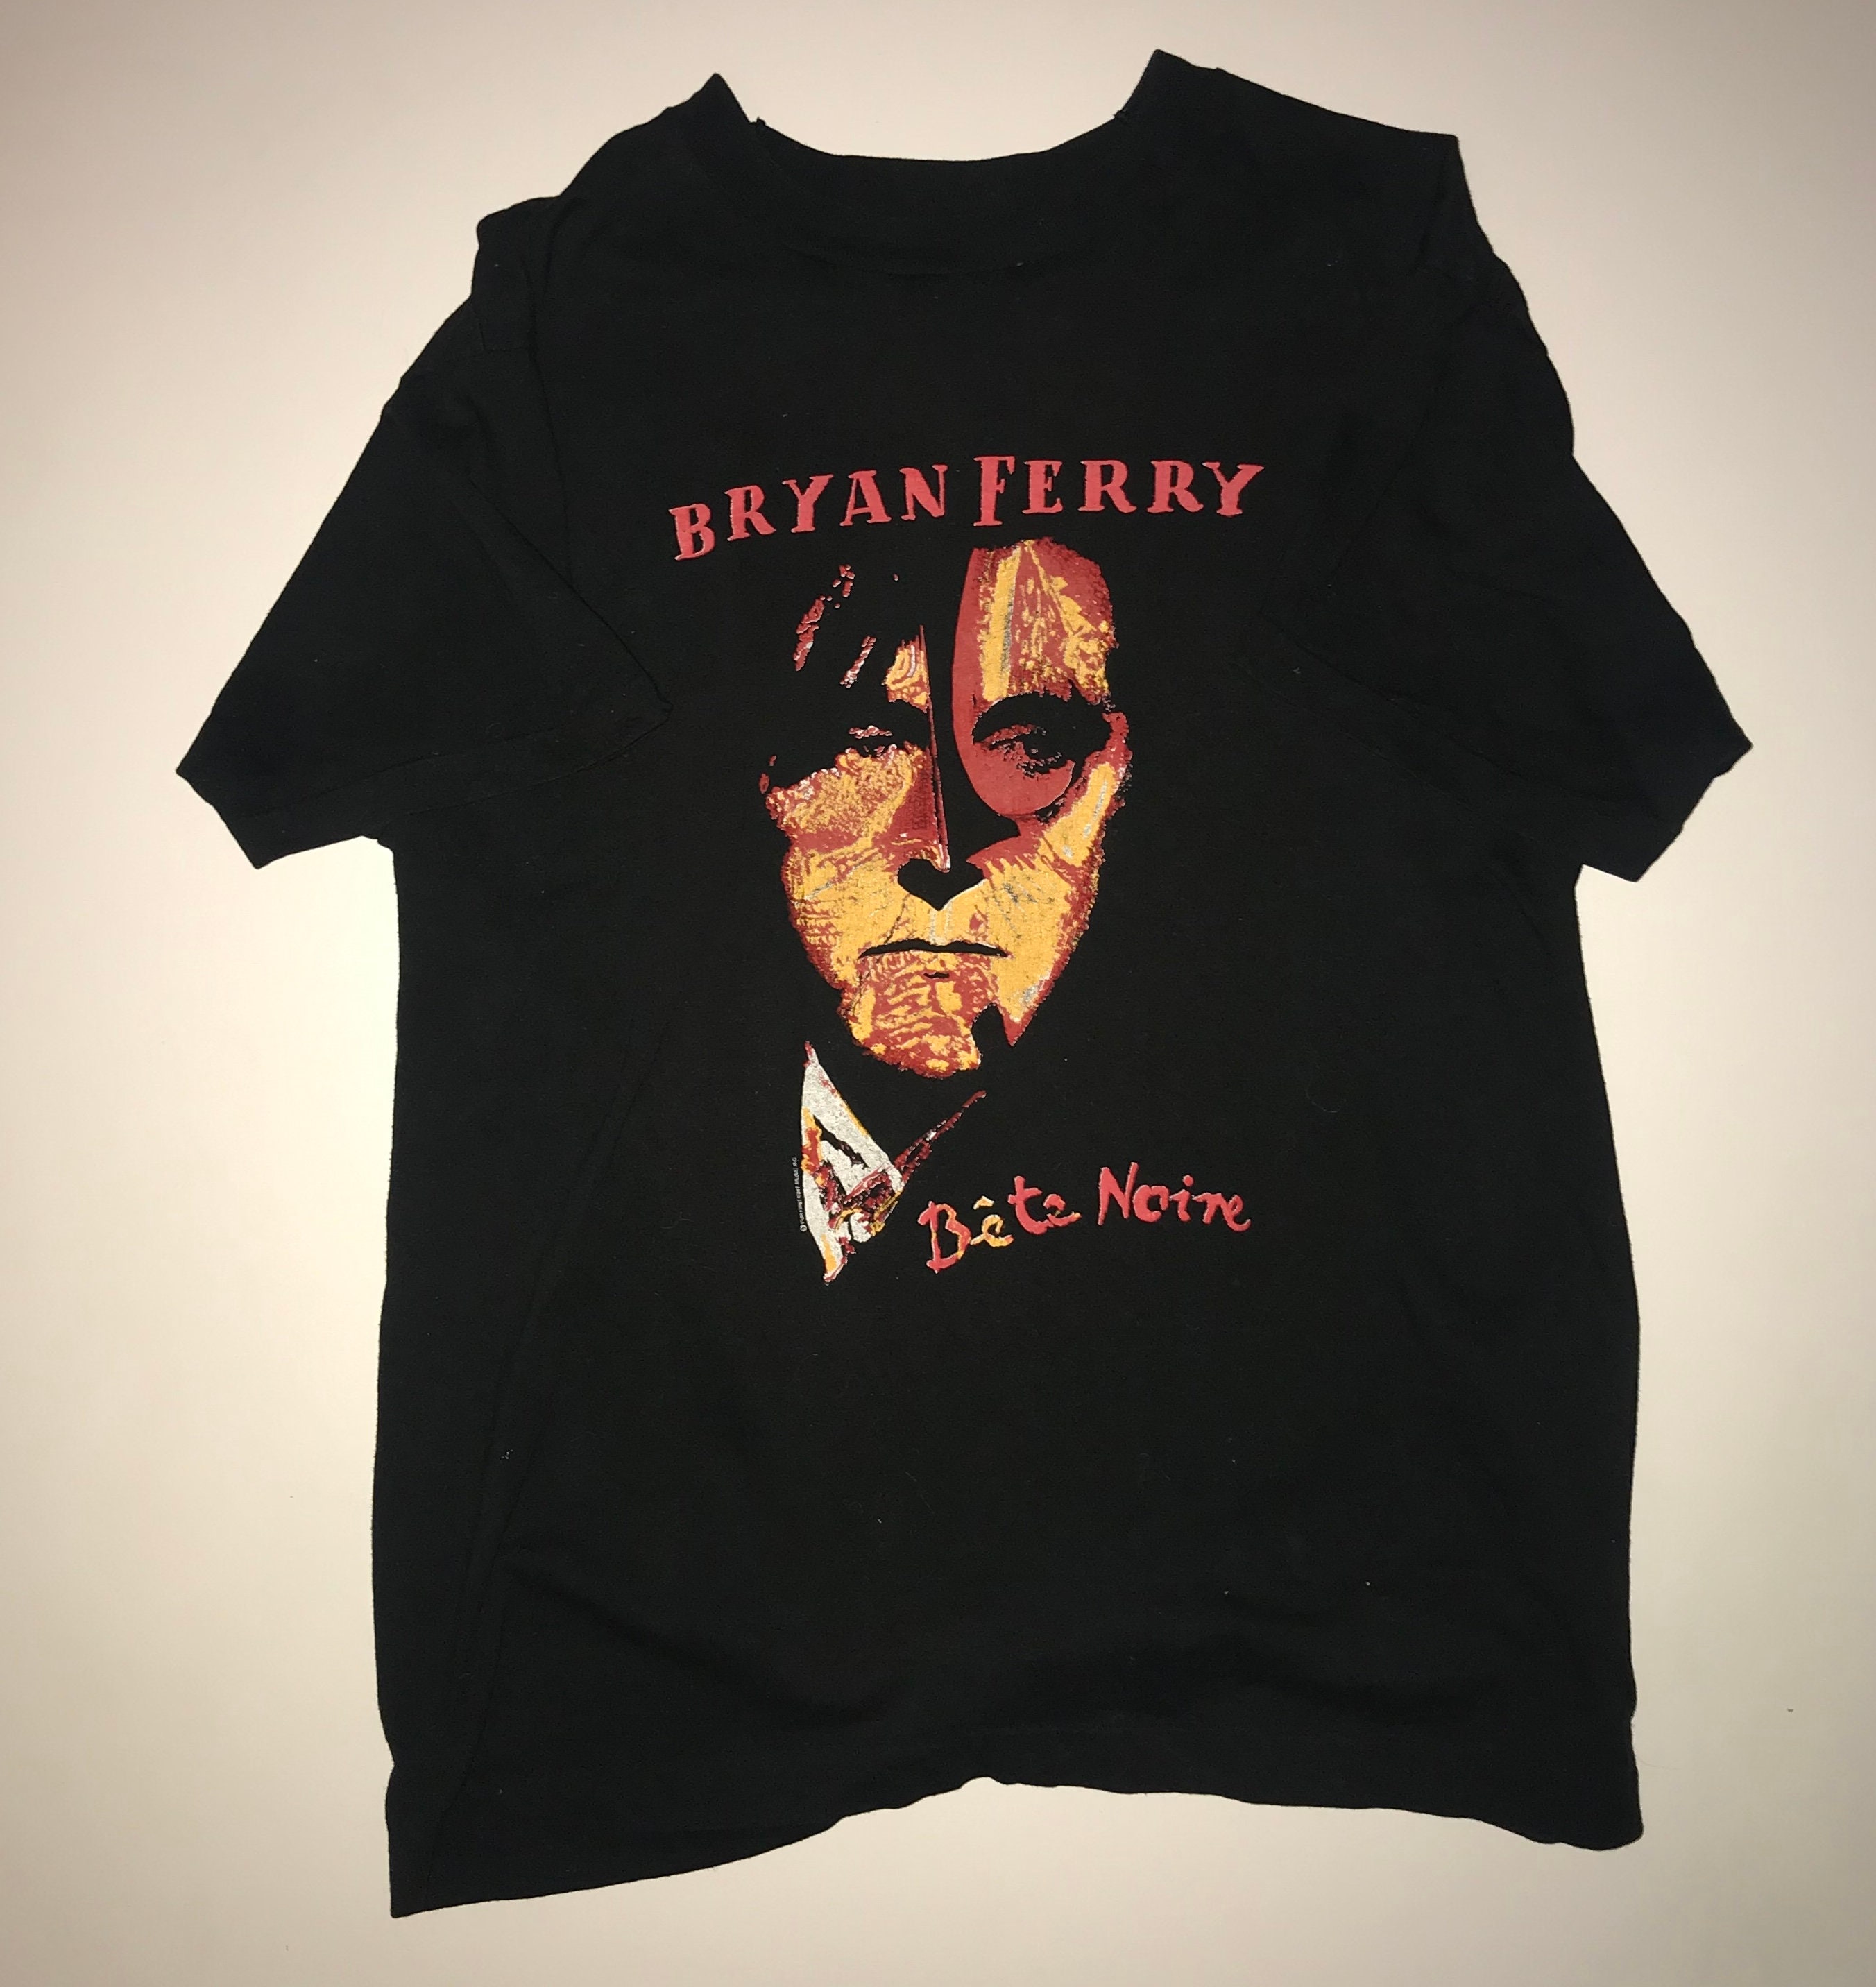 Bryan Ferry 1988 Tour Fruit of the Loom T-shirt Size Large - Etsy